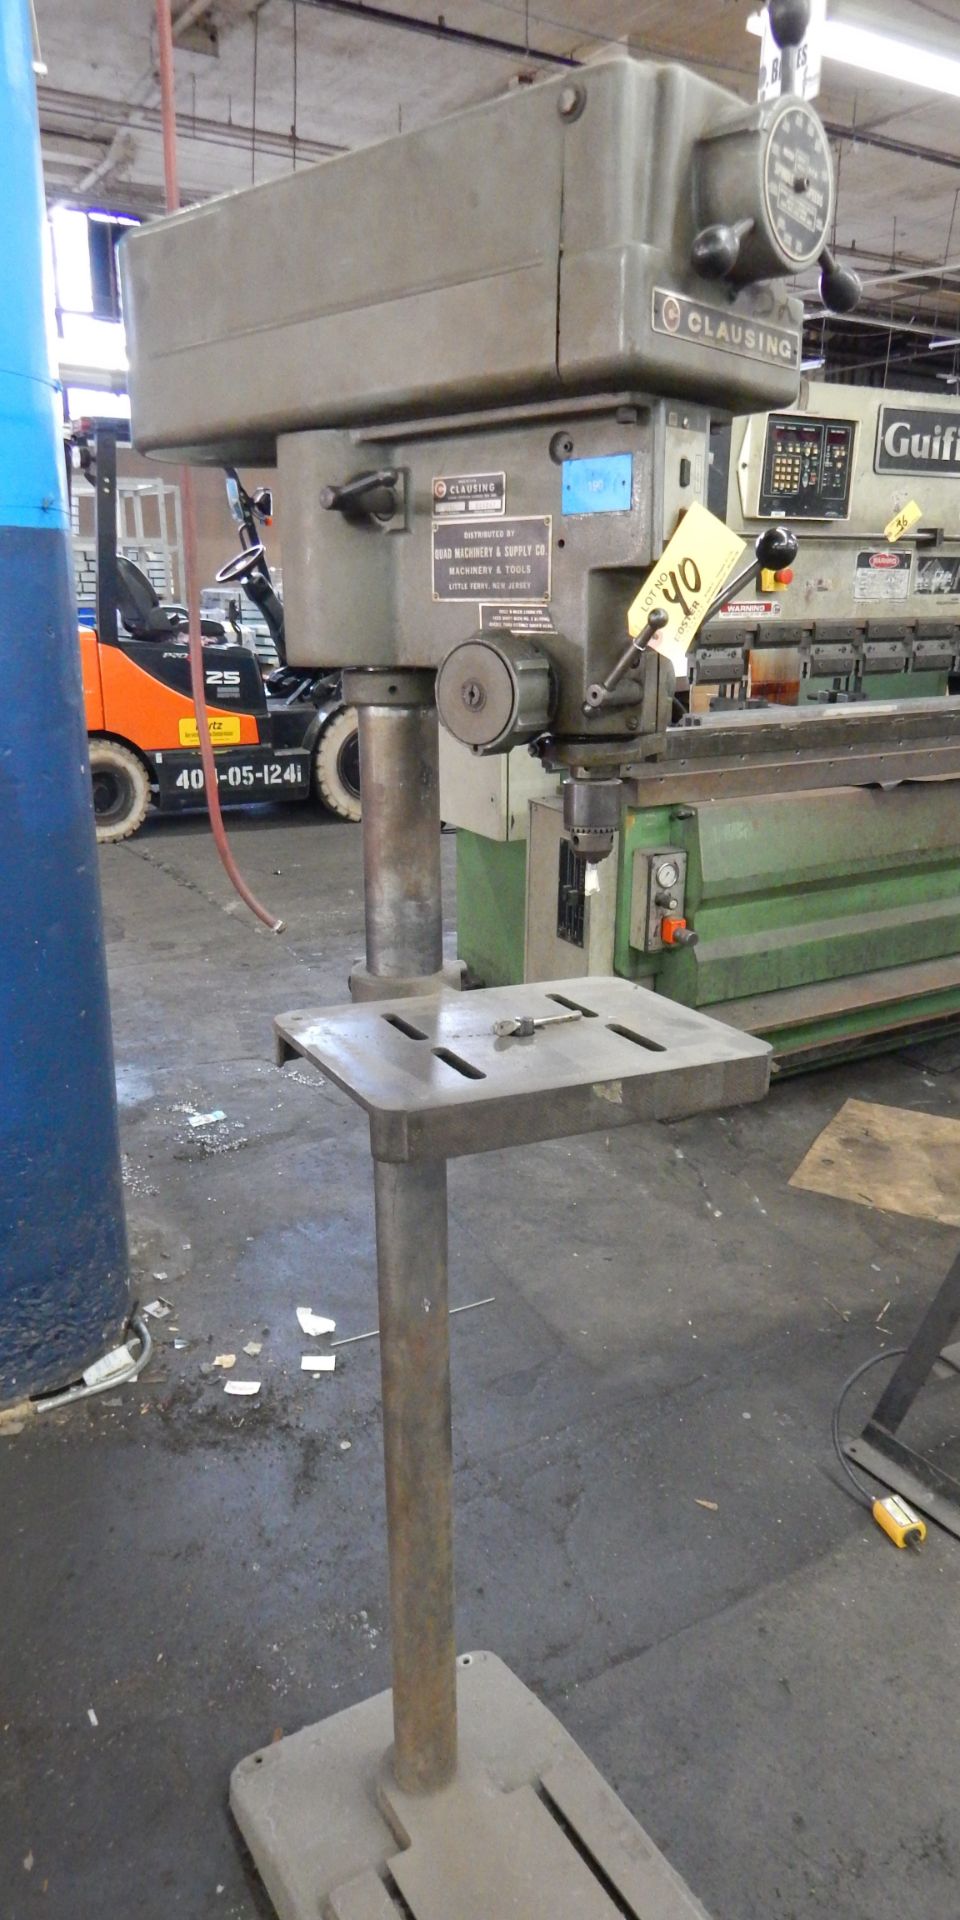 CLAUSING 15'' PEDESTAL TYPE DRILL PRESS, WITH 330-4000 RPM SPINDLE SPEEDS (NO MOTOR)